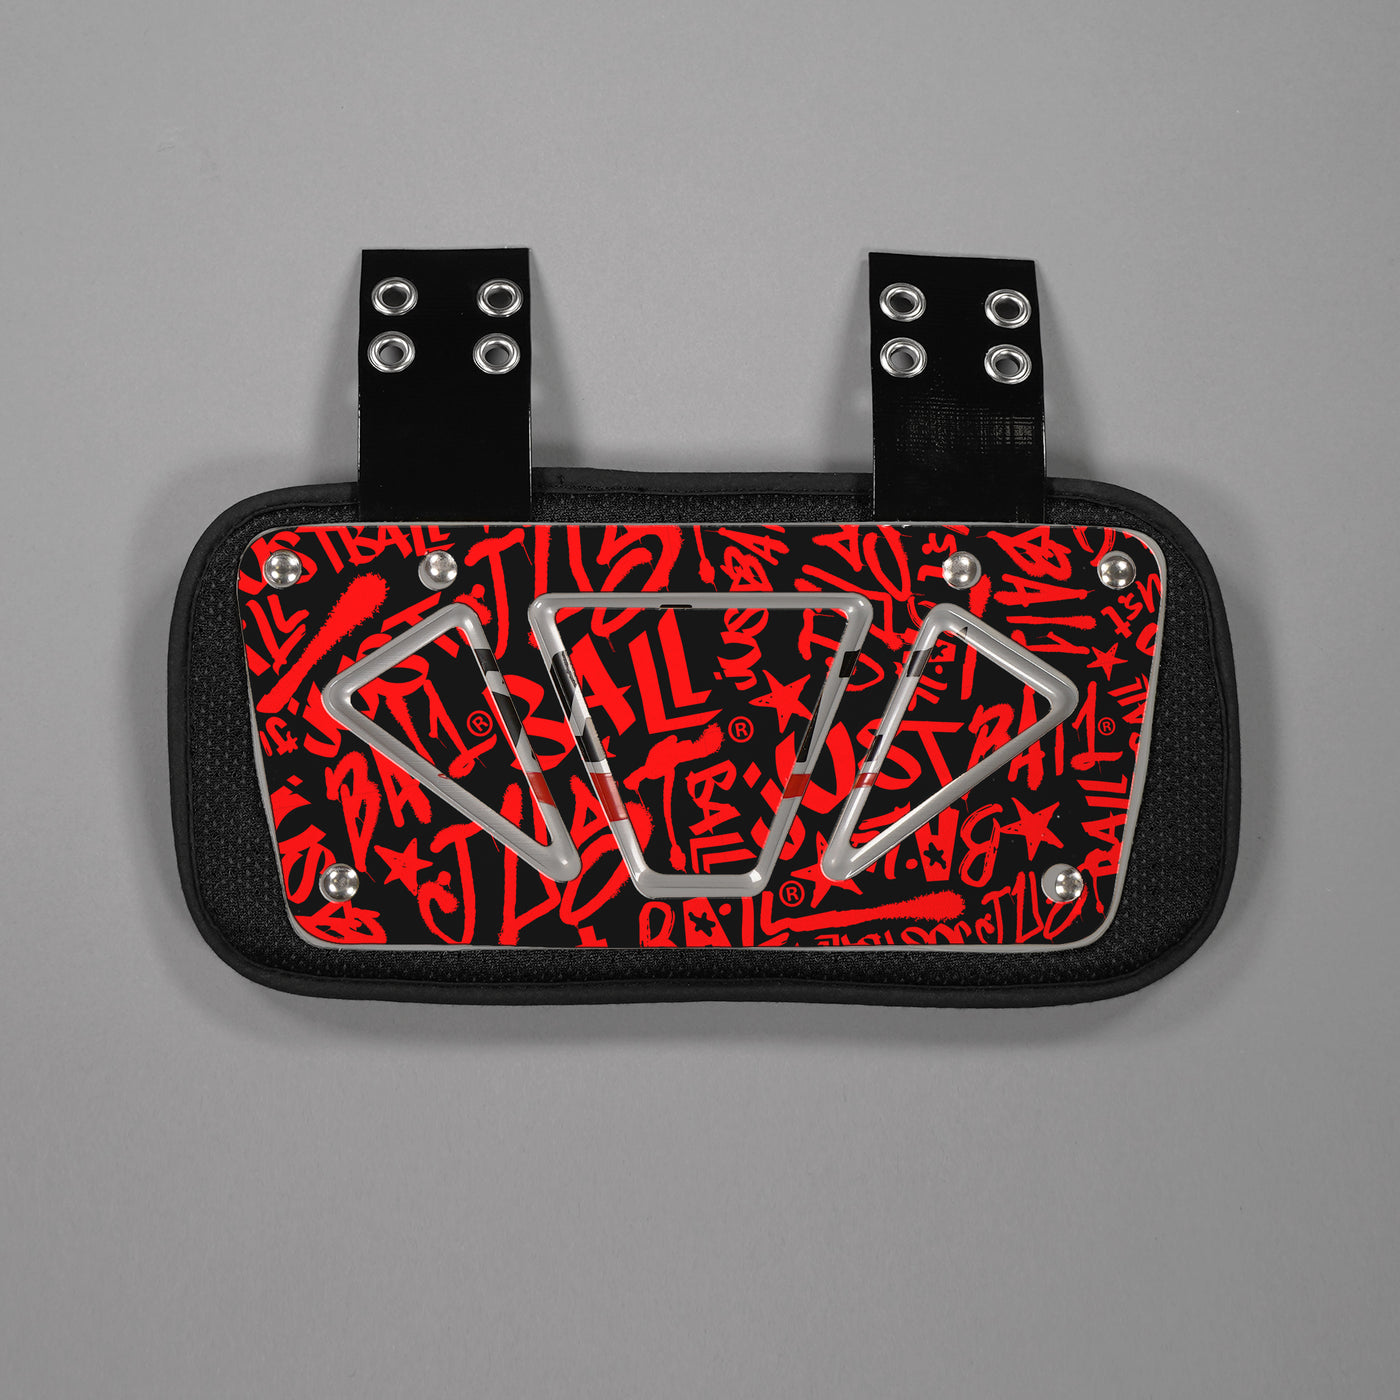 Just Ball Red Sticker for Back Plate